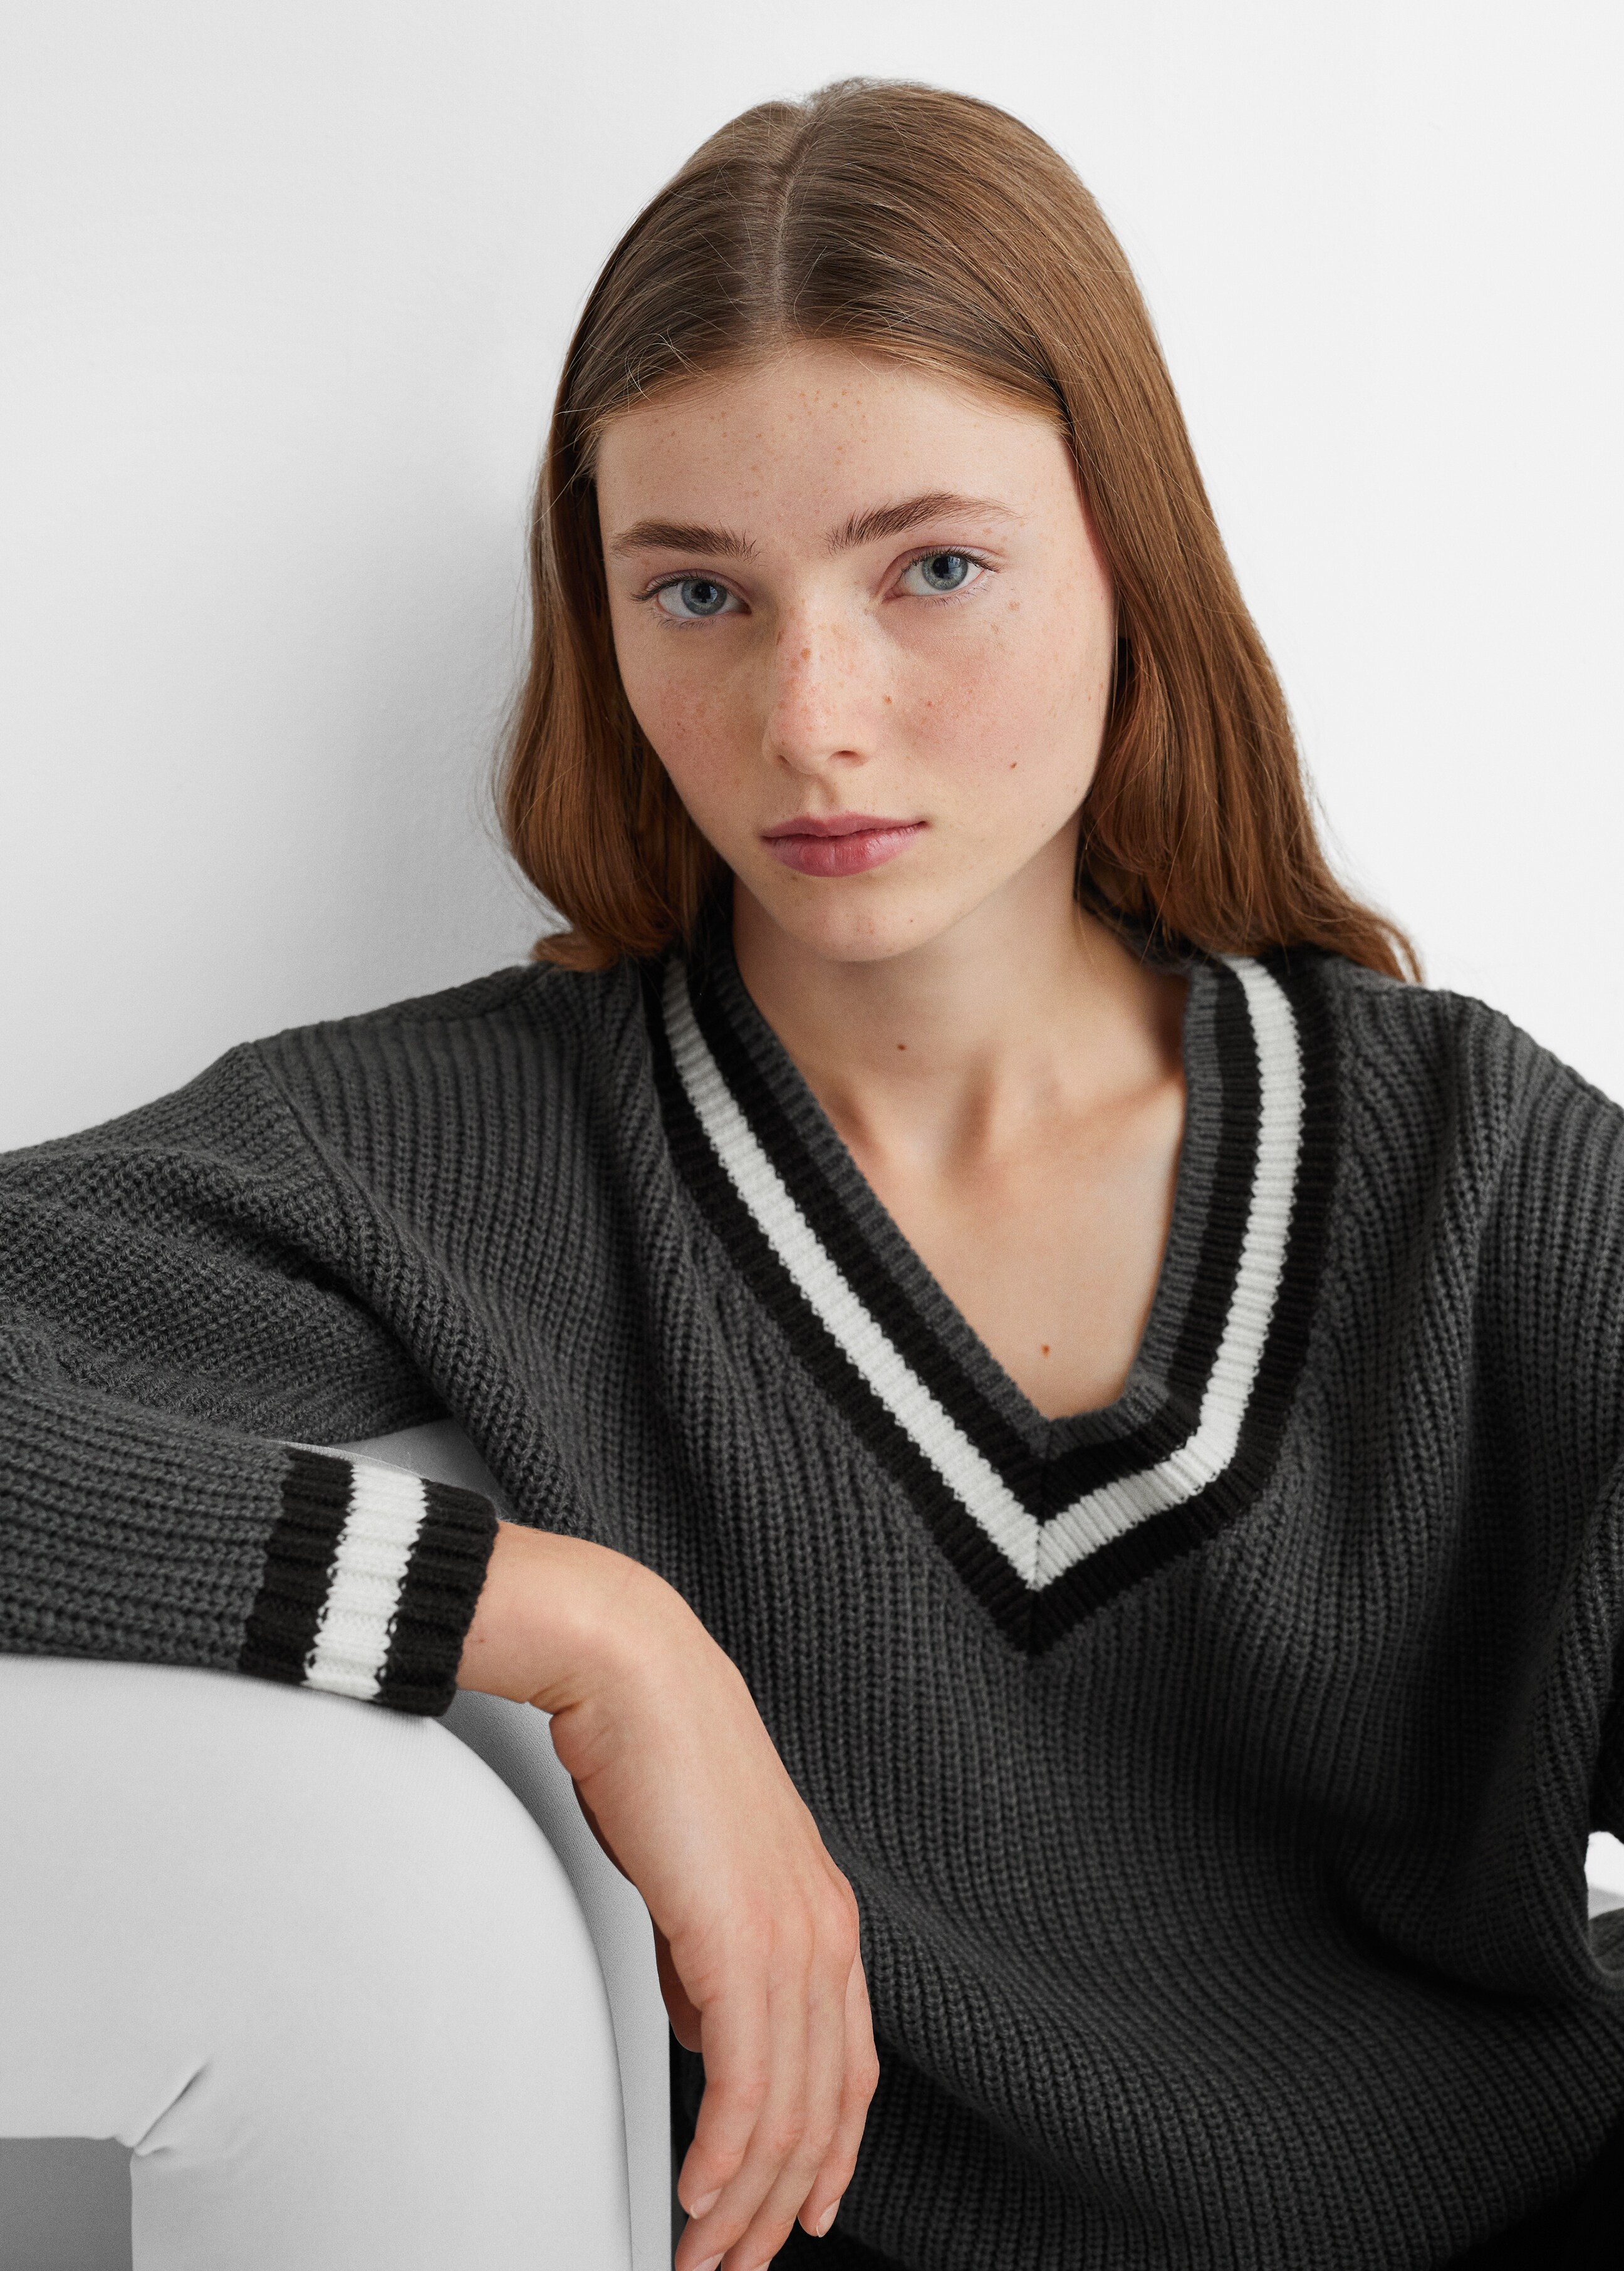 V-neck knit sweater - Details of the article 2